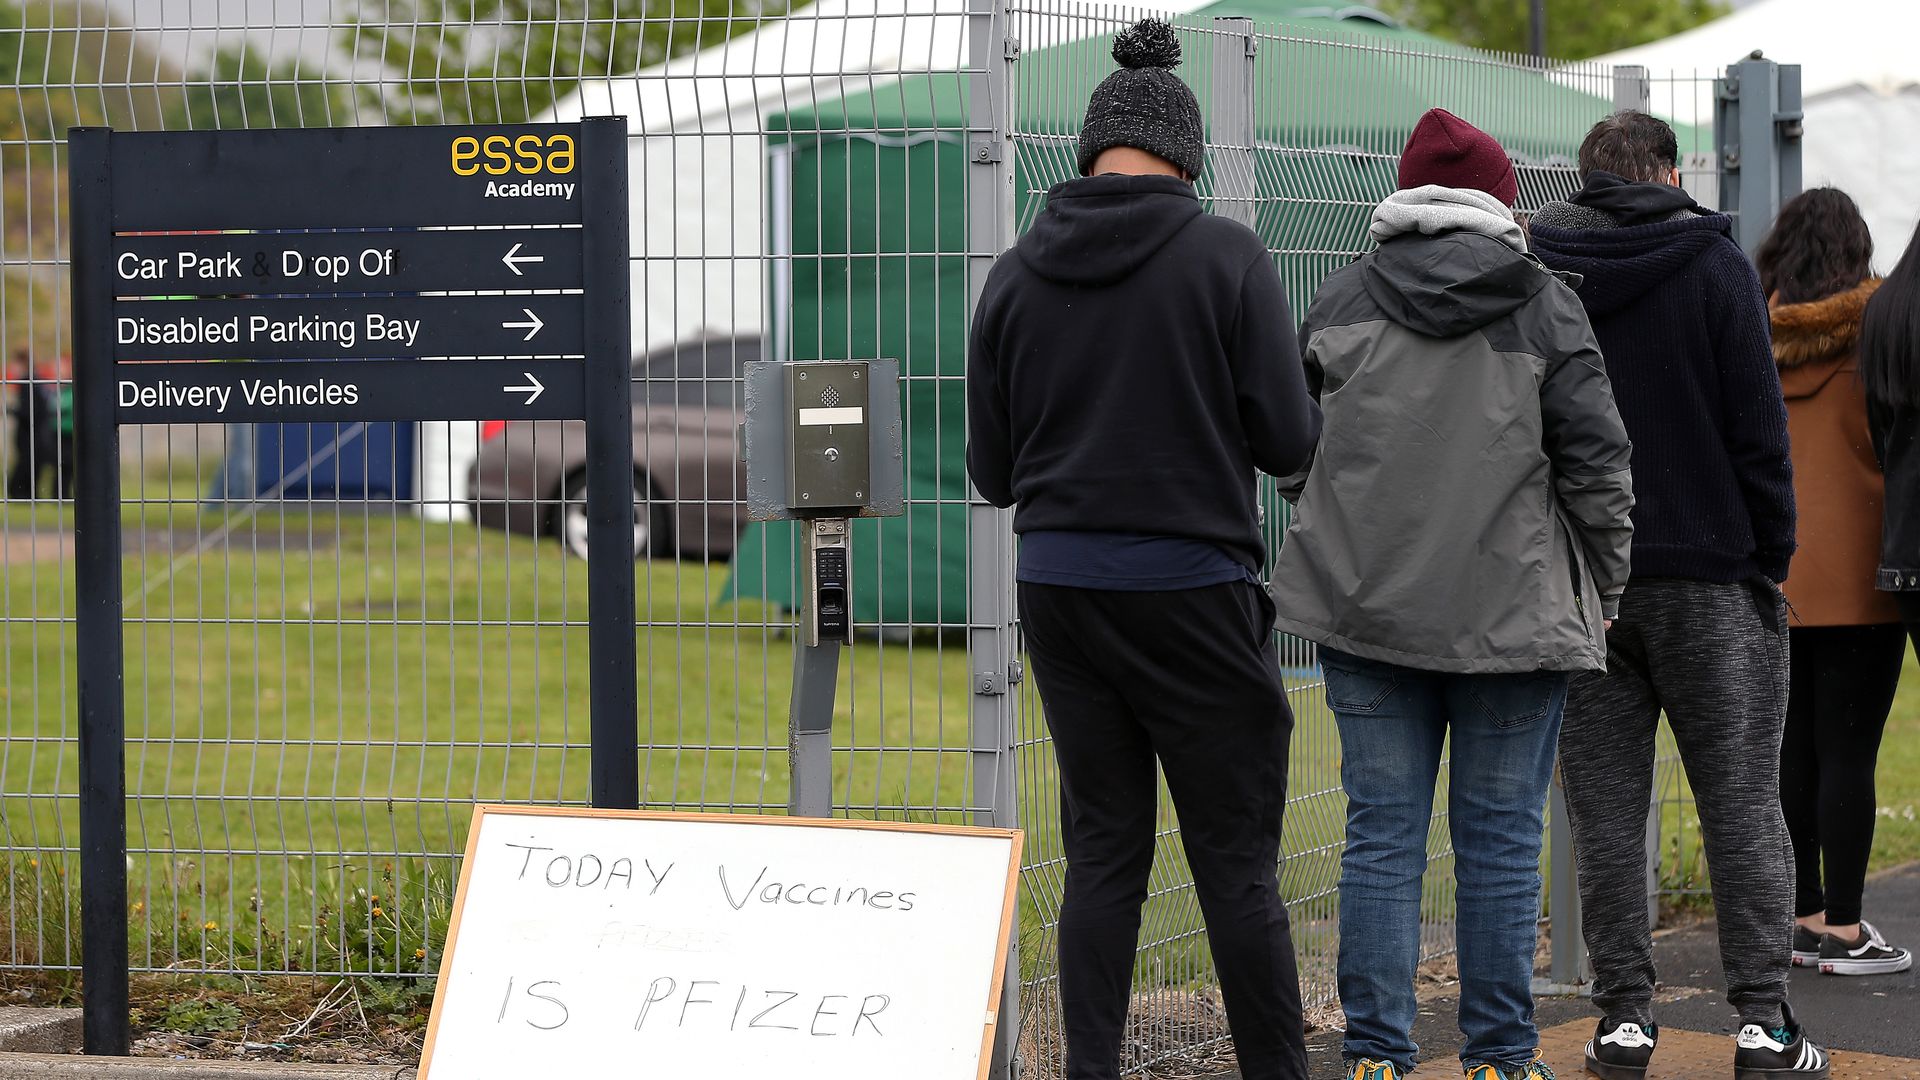  A sign reading 'Today Vaccines Is Pfizer' is seen outside Essa Academy as people queue to get vaccinated on May 15, 2021 in Bolton, England. 